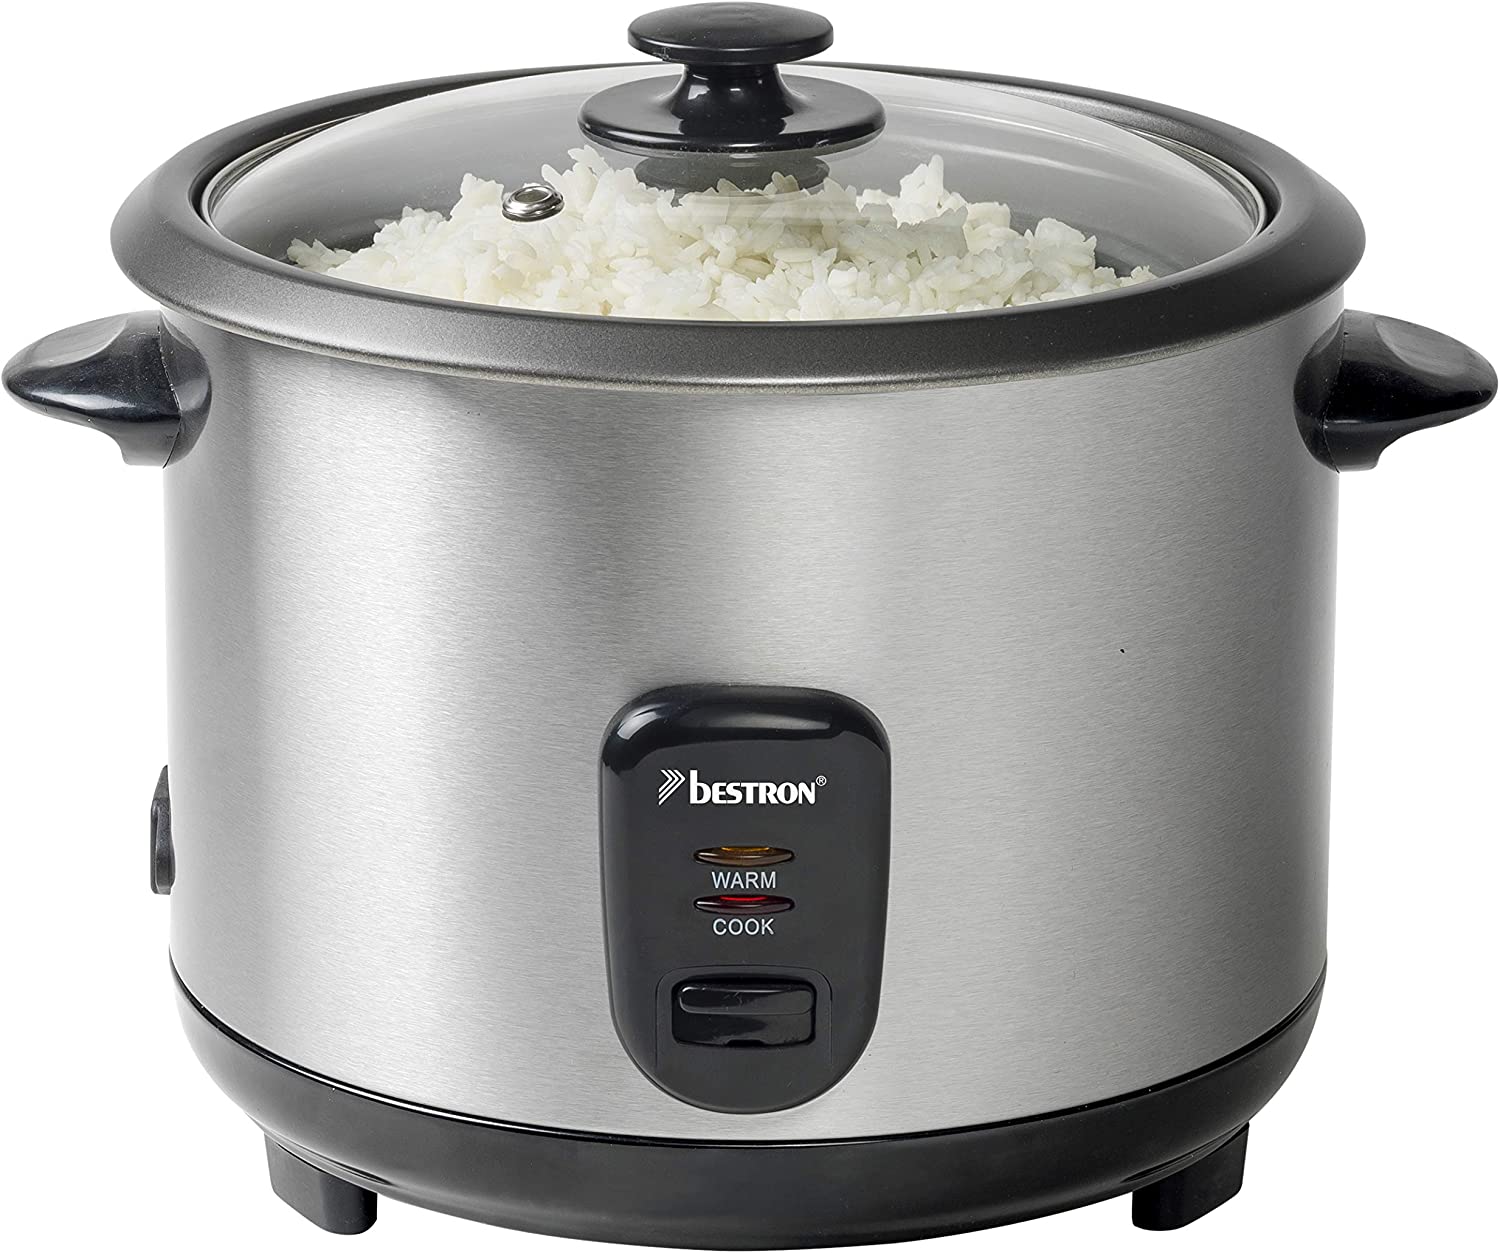 Bestron Large Rice Cooker for 8-10 People, Includes Steamer Attachment, Measuring Cup & Rice Spoon, with Non-Stick Coating and Indicator Light, Dishwasher Safe, 1.8 Litres, 700 W, Colour: Silver